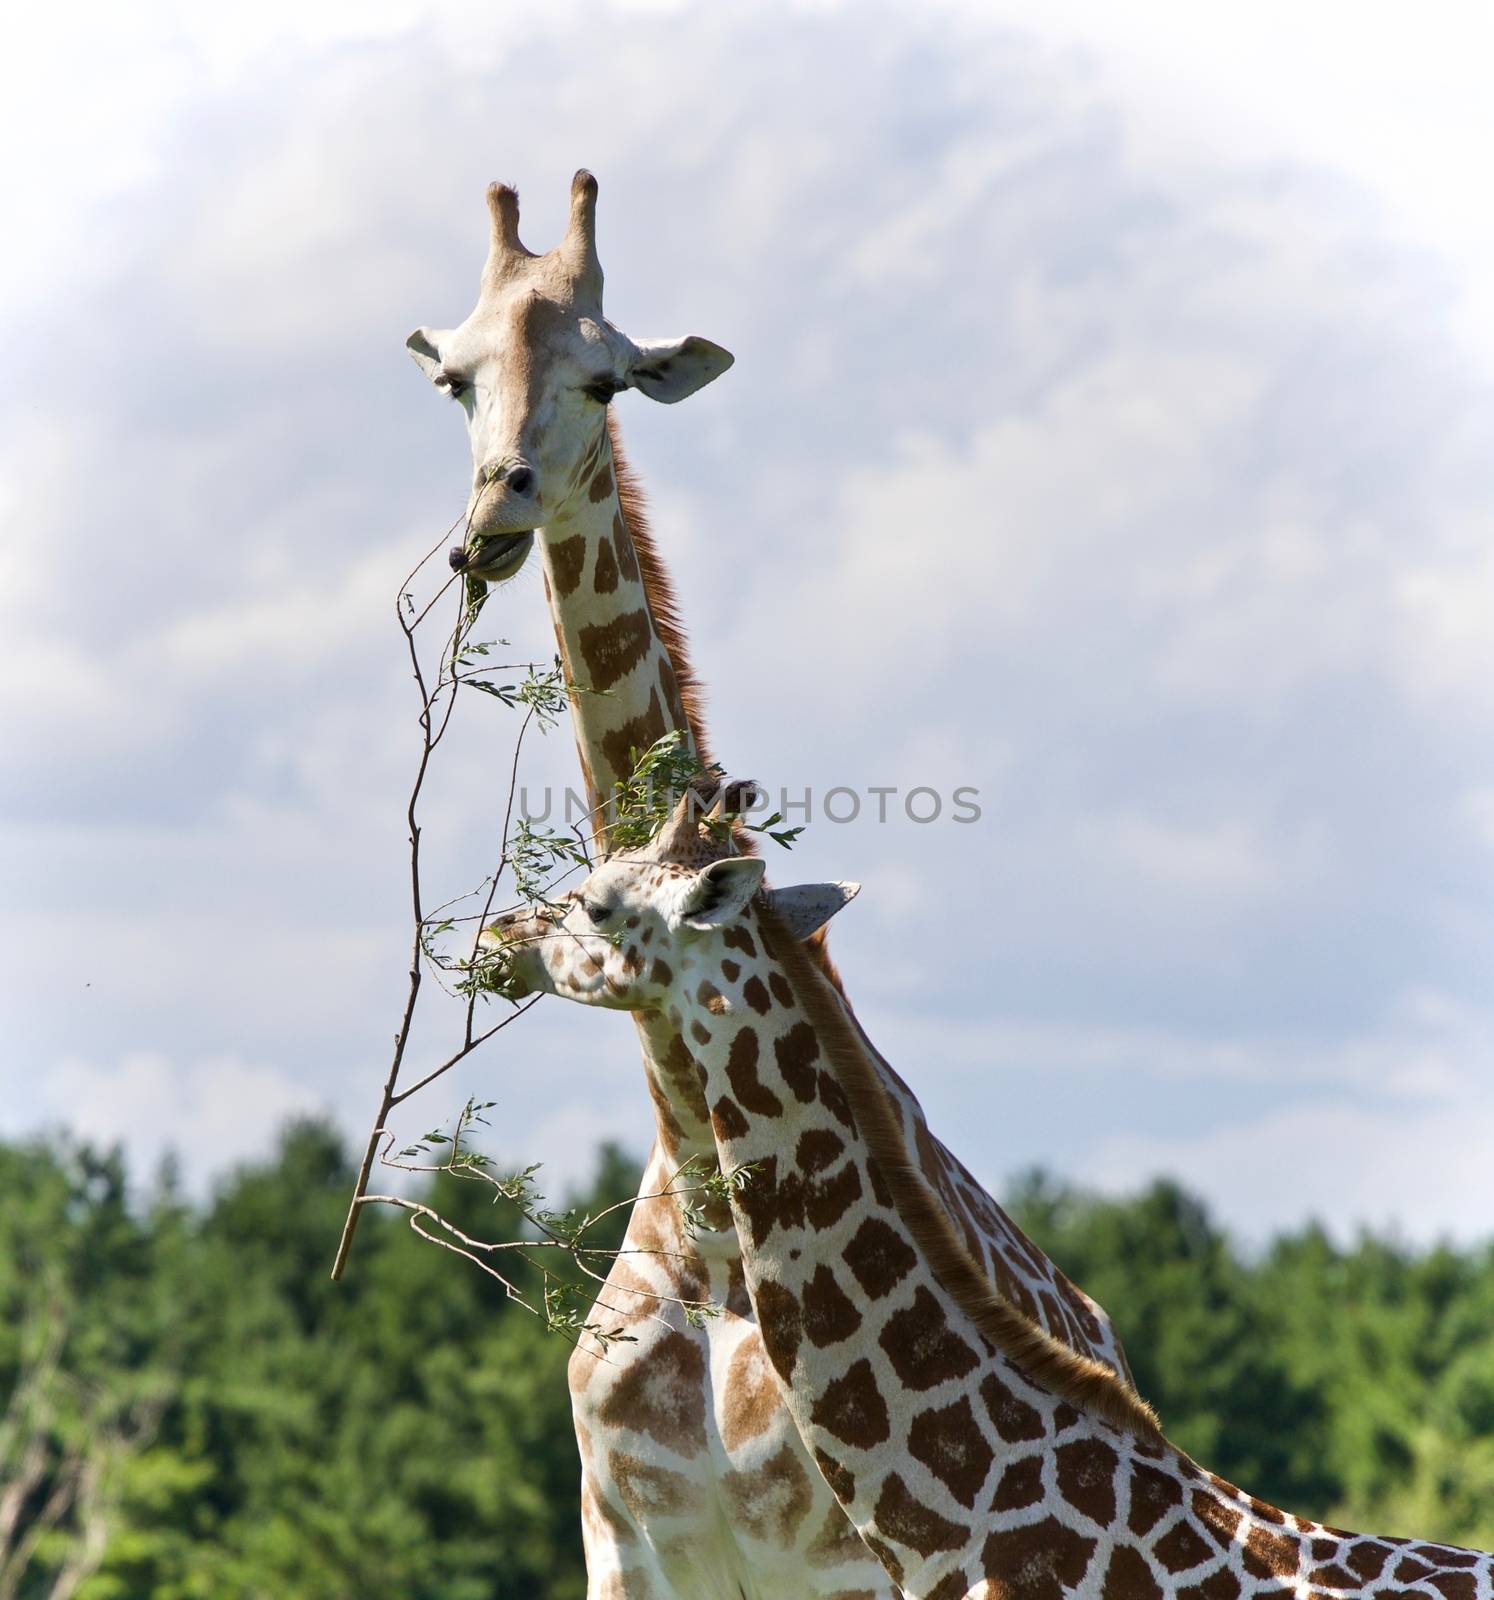 Picture with two cute giraffes eating leaves